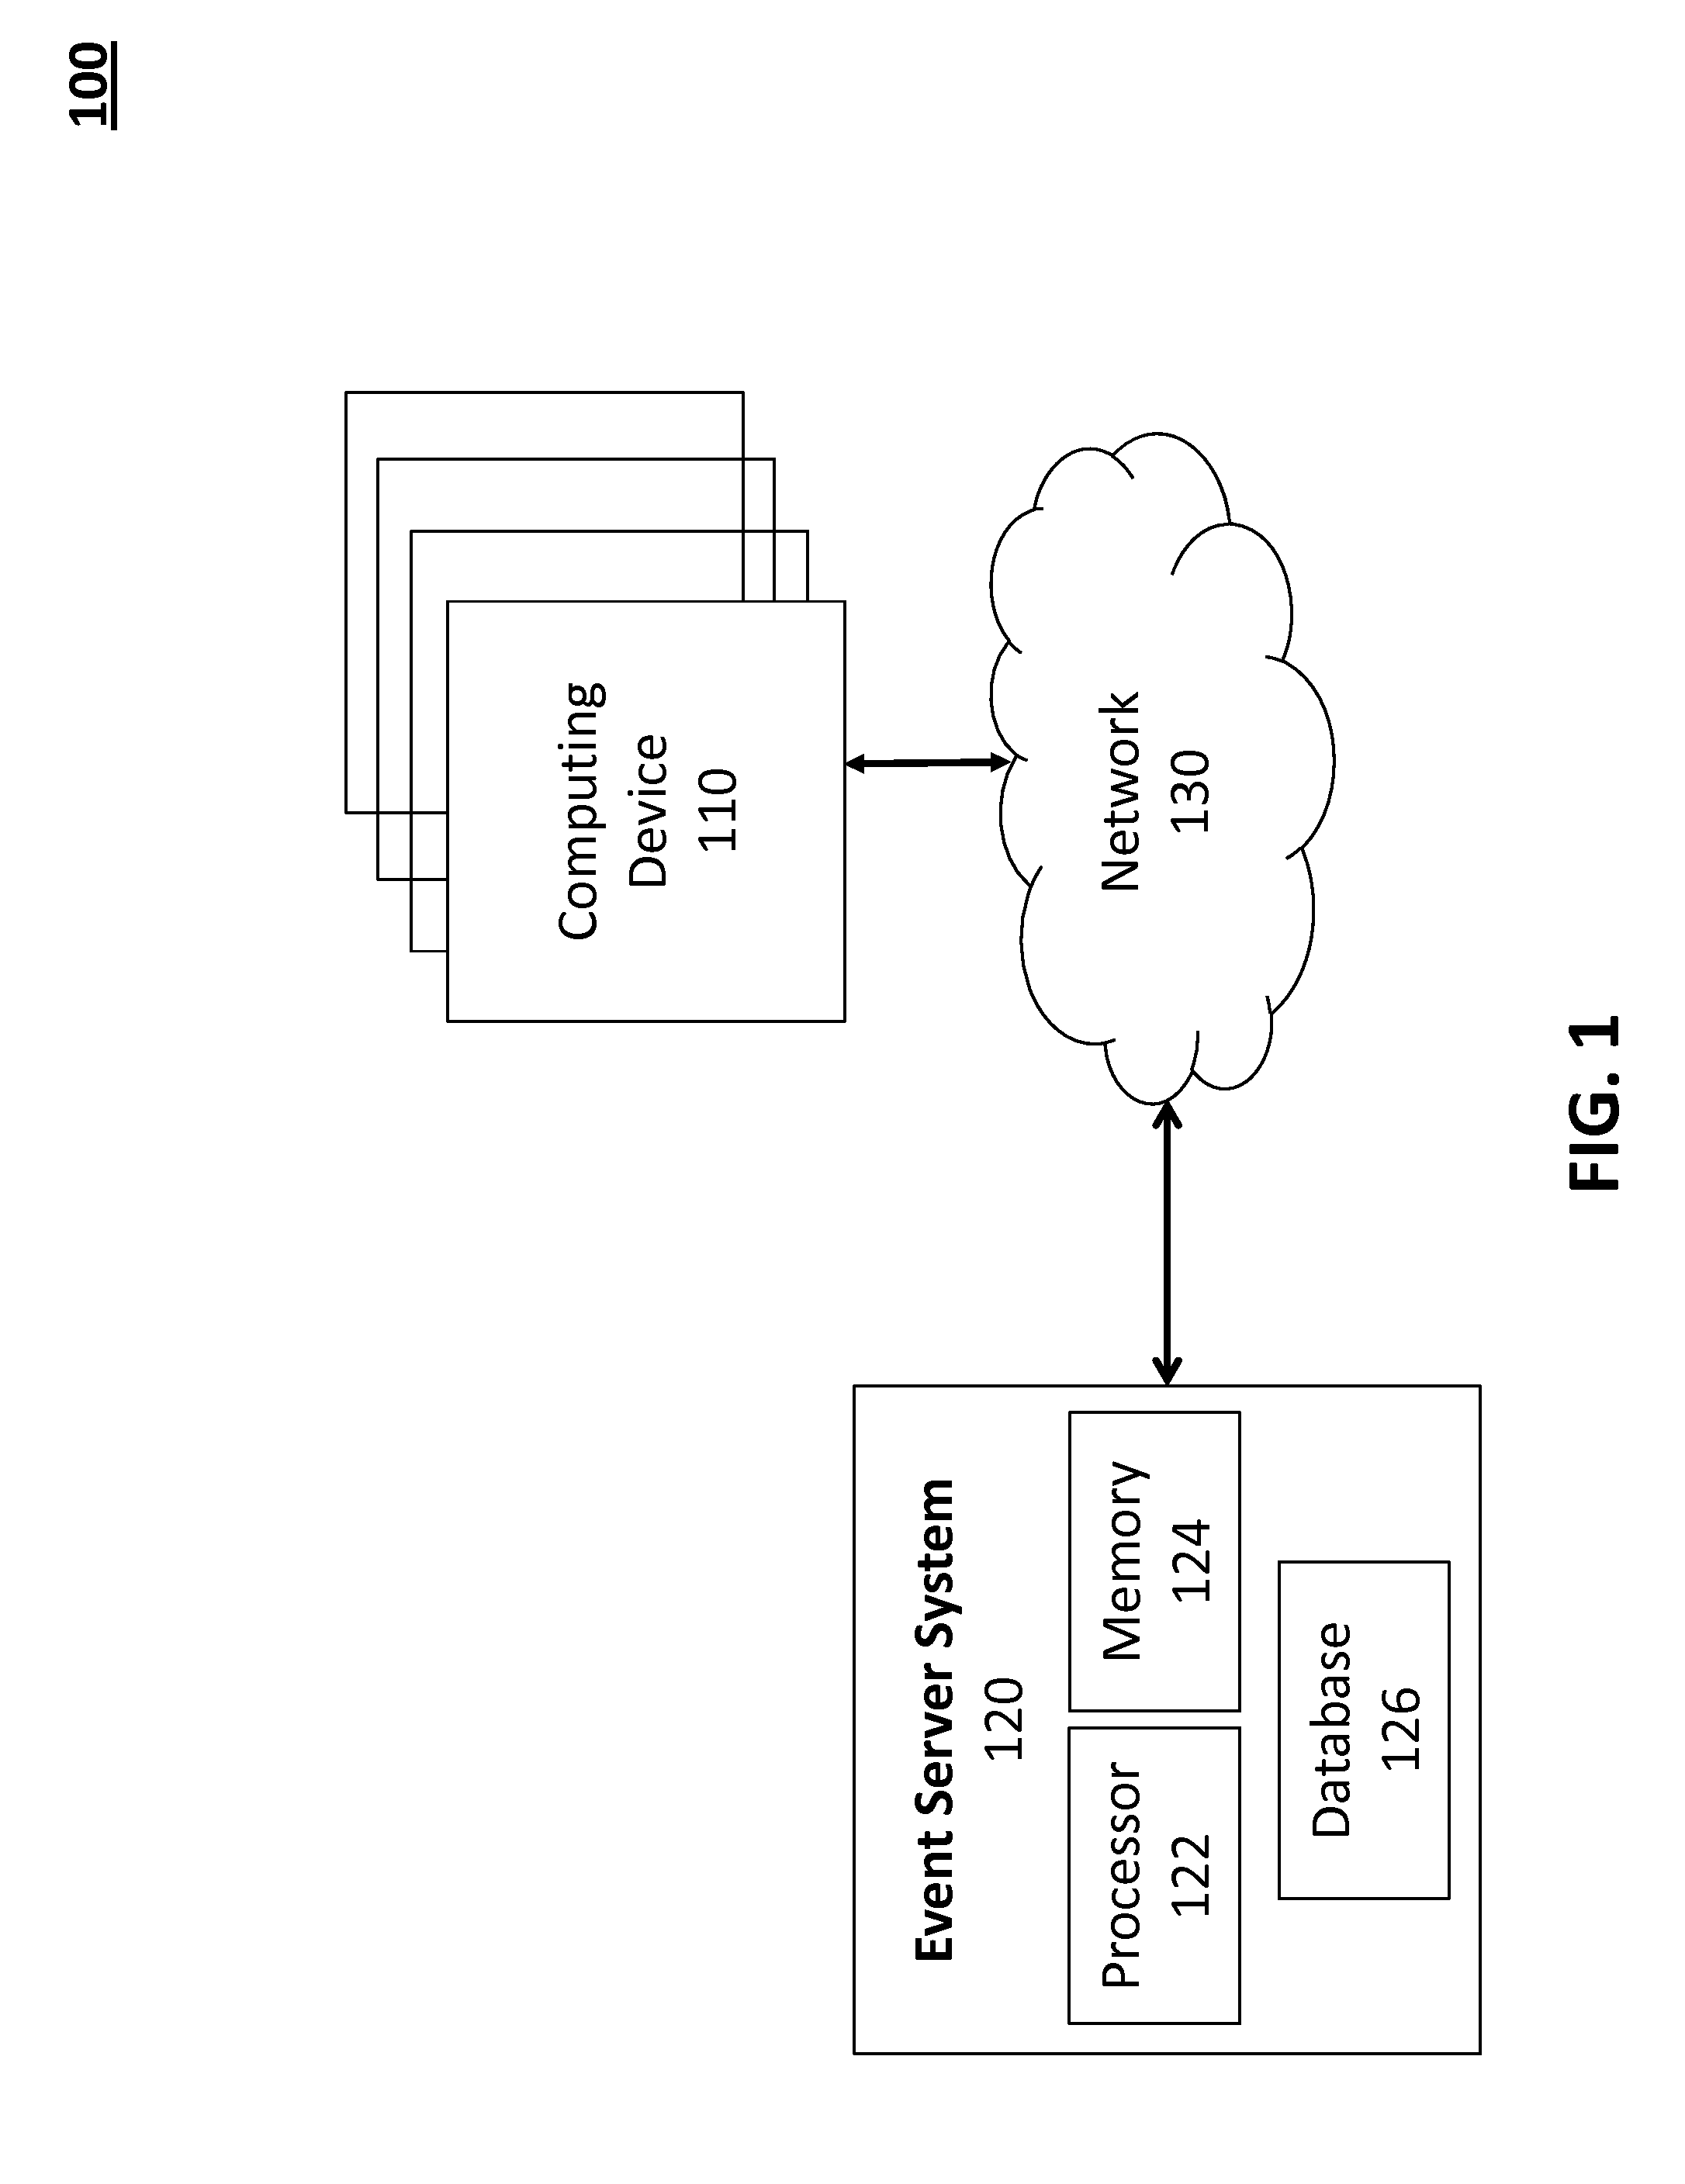 Systems and methods for scheduling events with gesture-based input